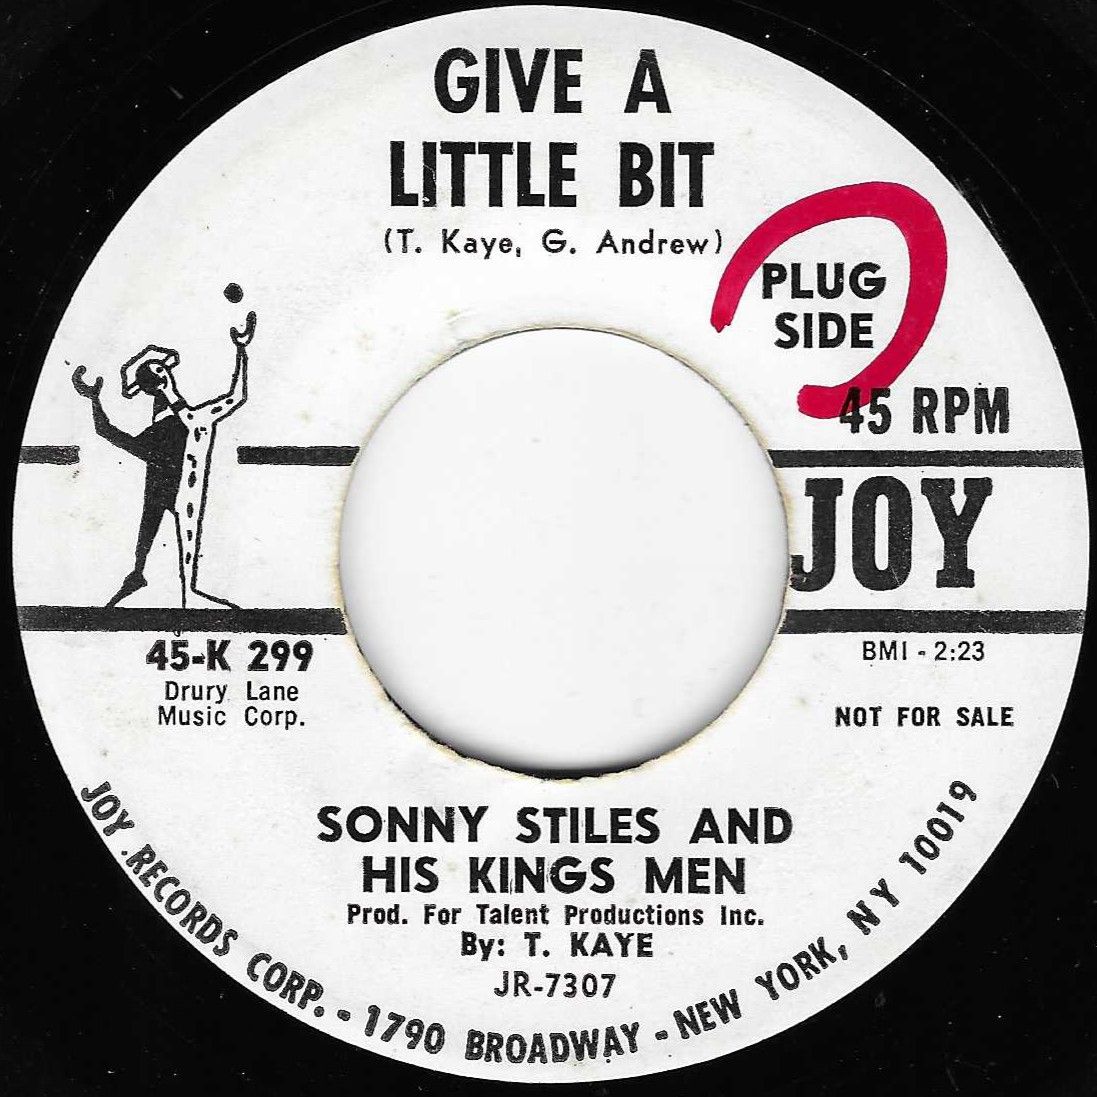 SONNY STILES AND HIS KING'S MEN - GIVE A LITTLE BIT